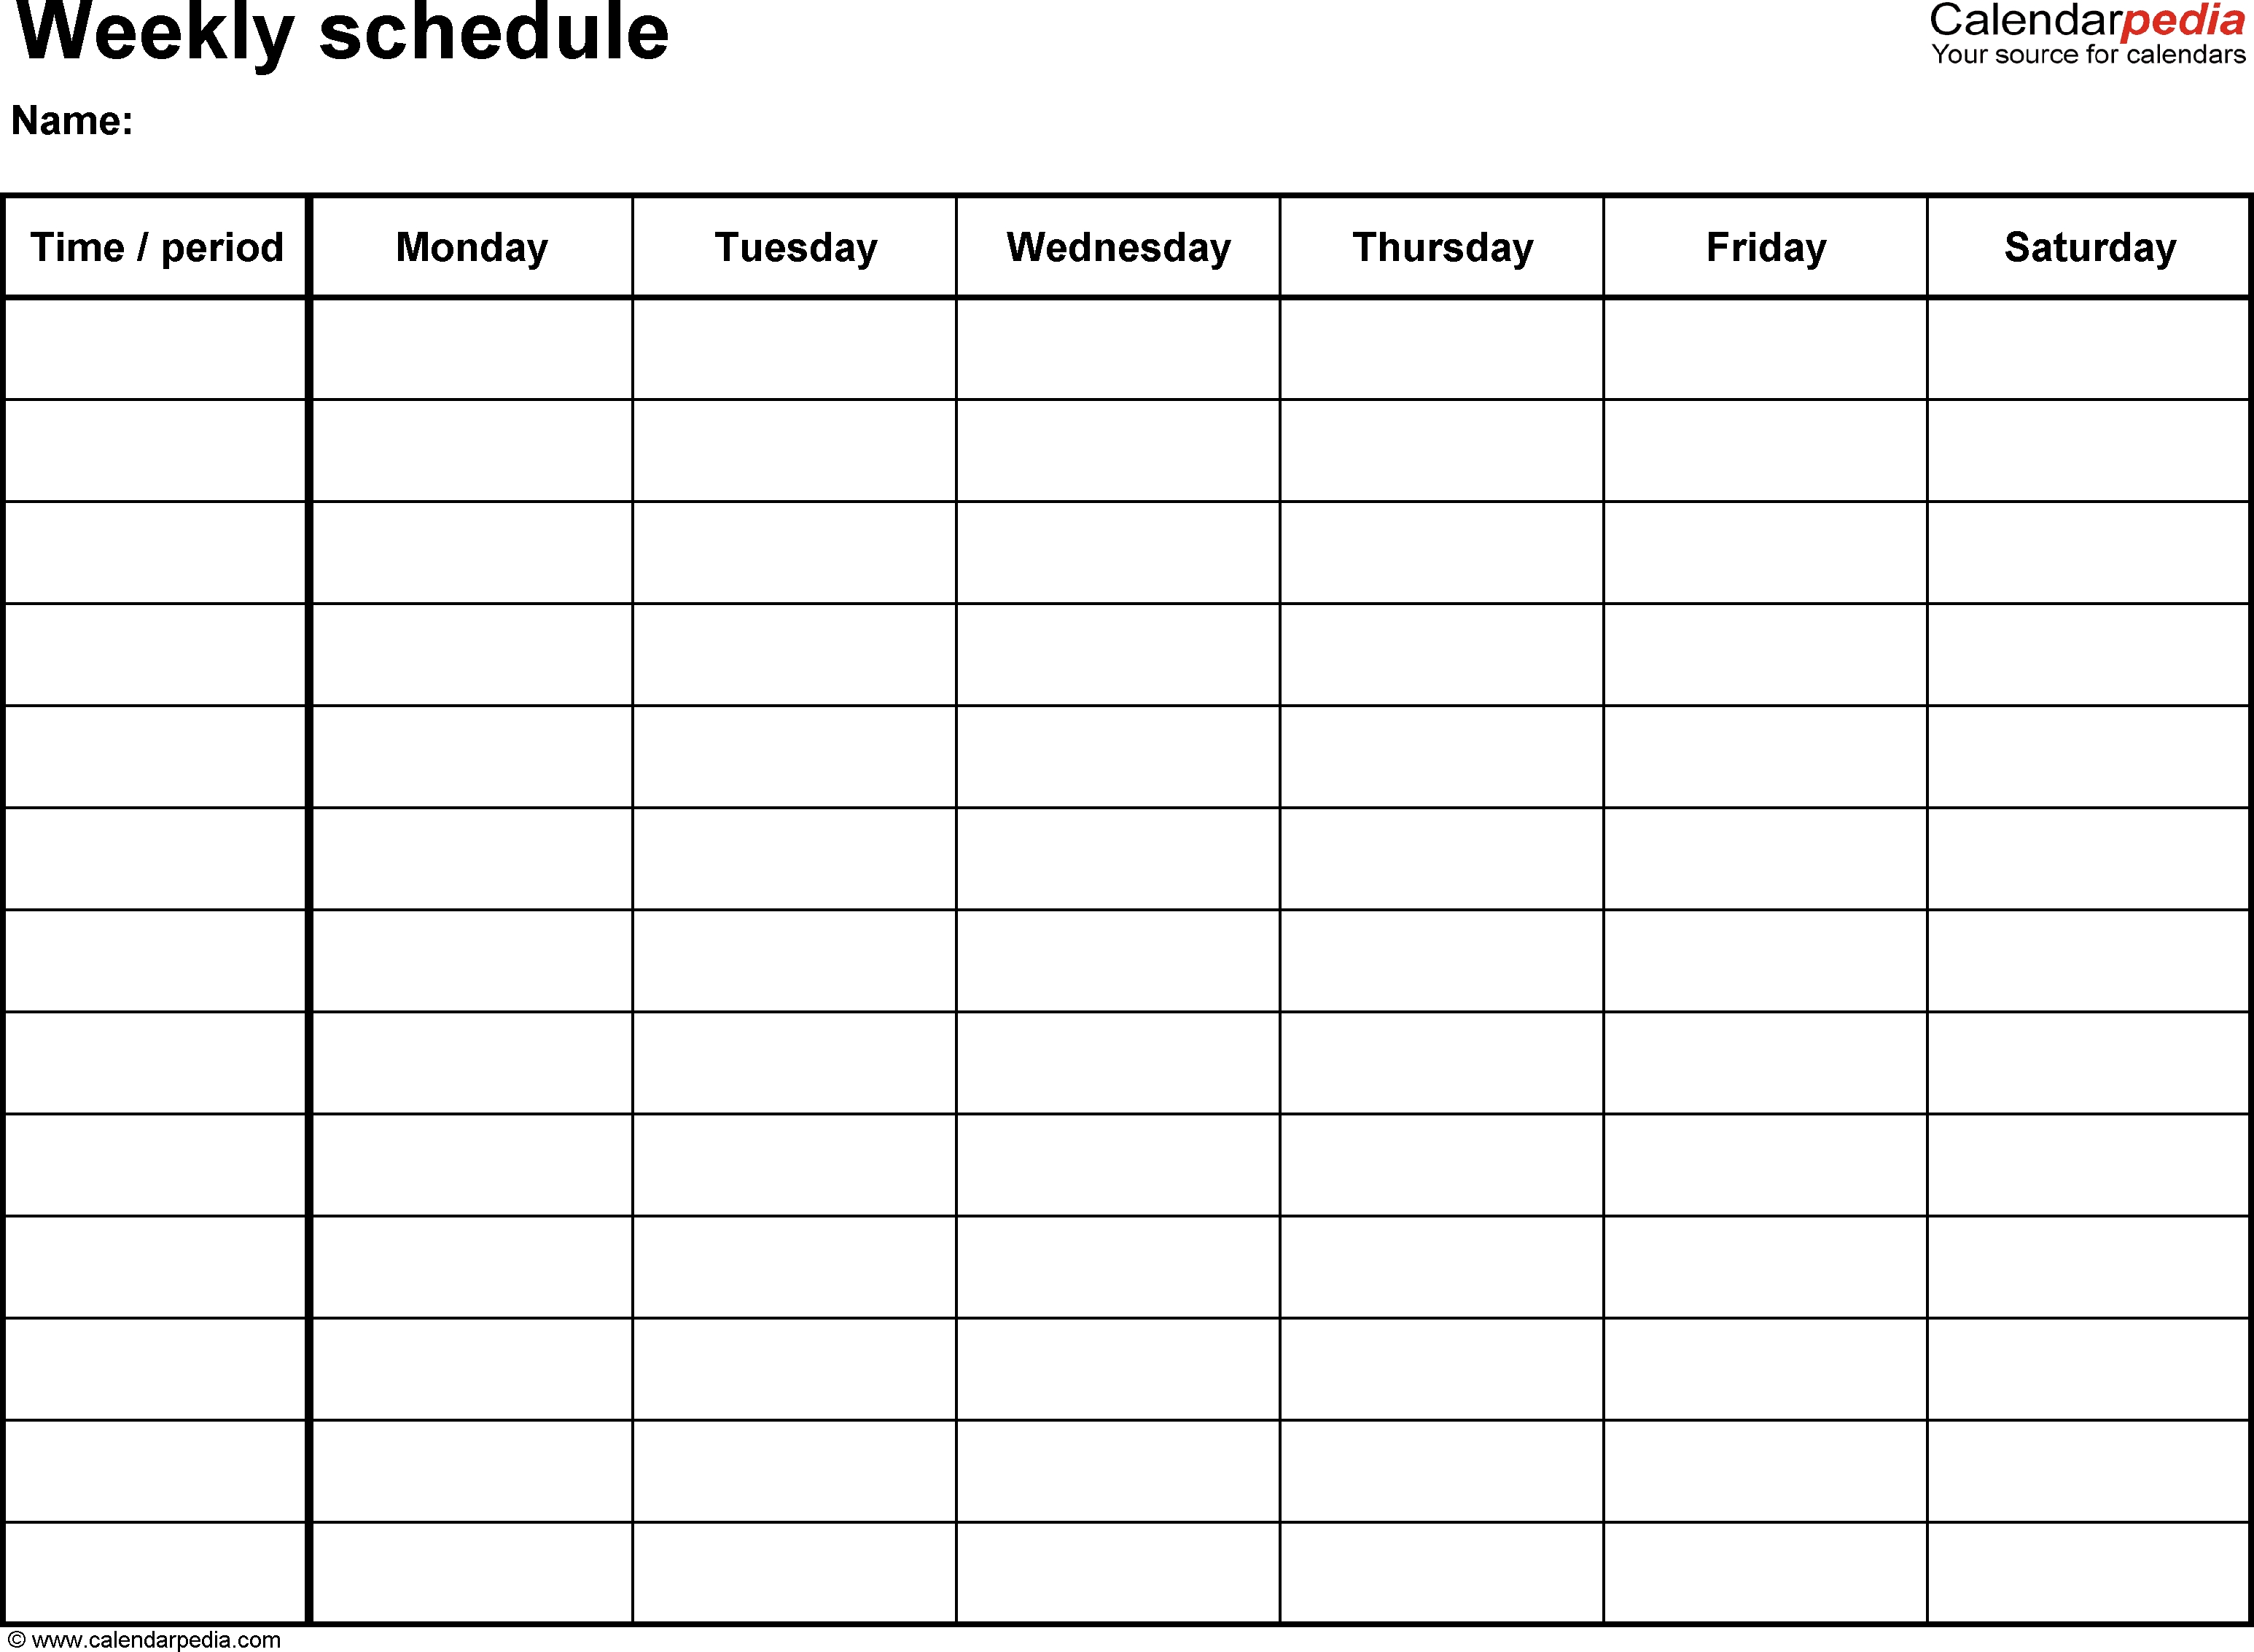 Free Weekly Schedule Templates For Word - 18 Templates-Summer Camp Template Calendar For Word